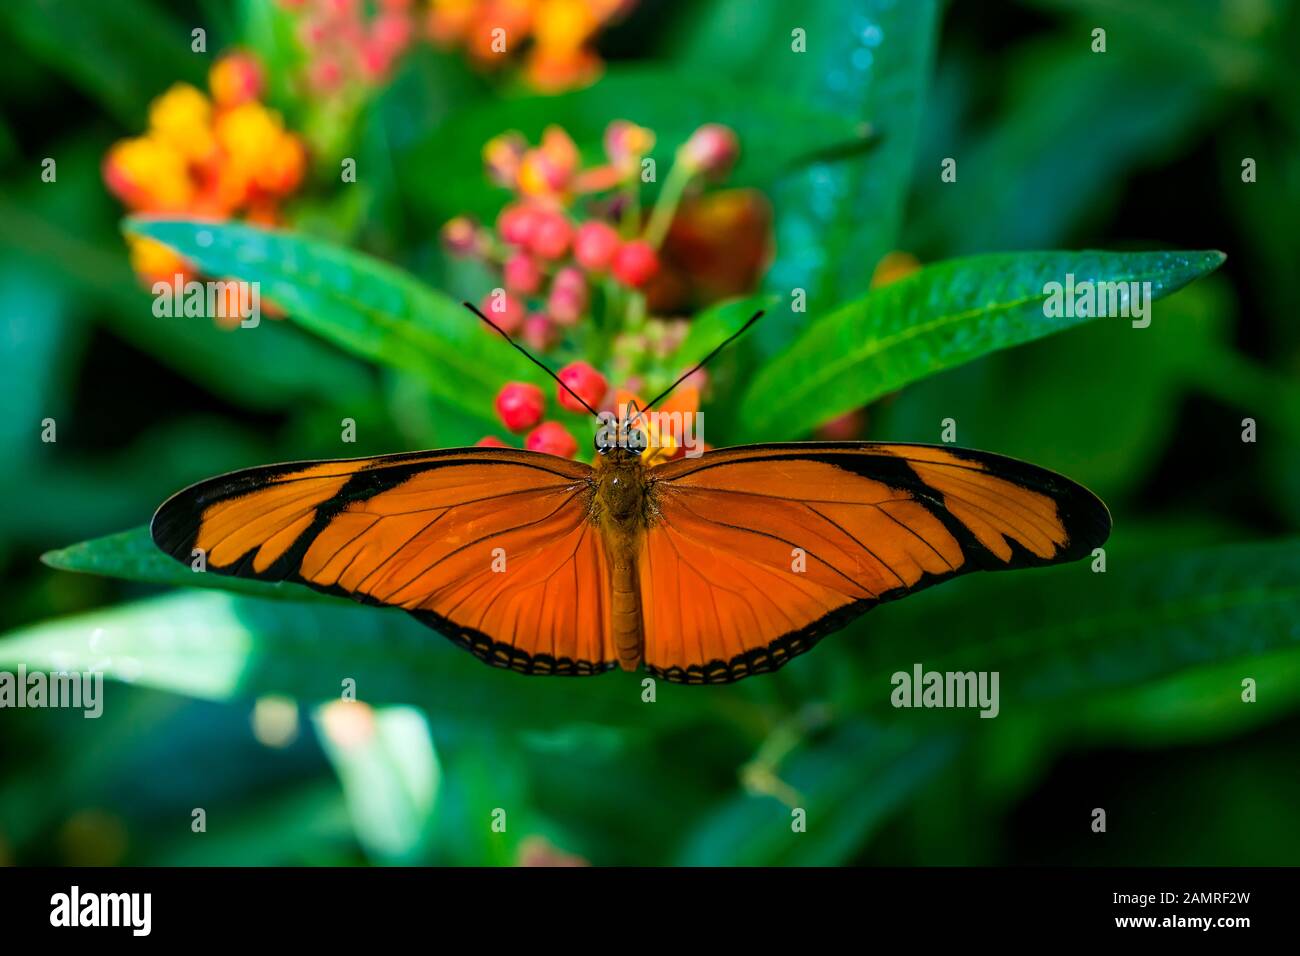 Butterly on flower Stock Photo